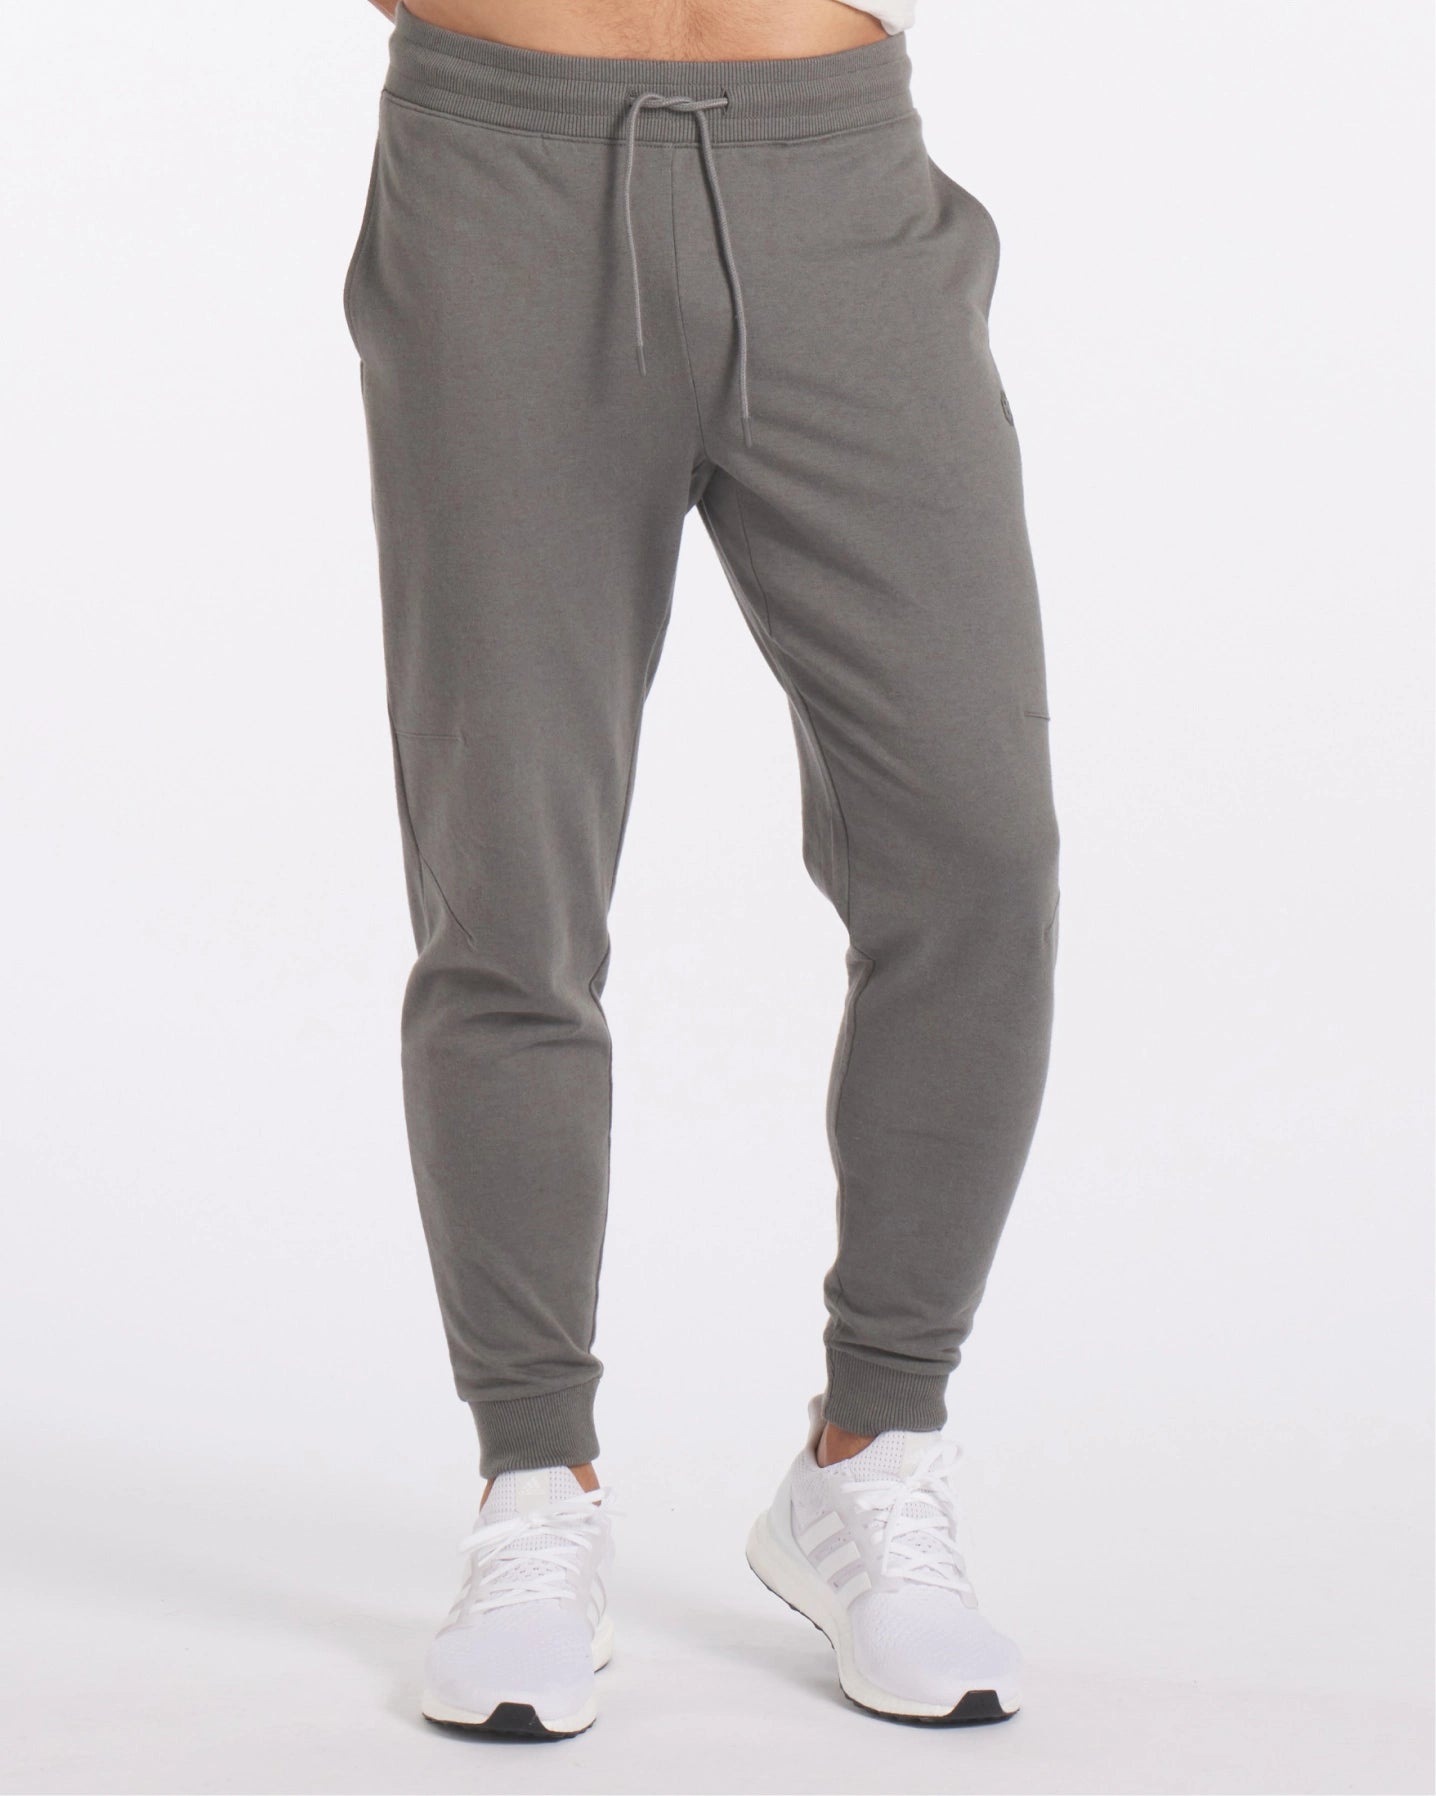 Model wearing the Joggers